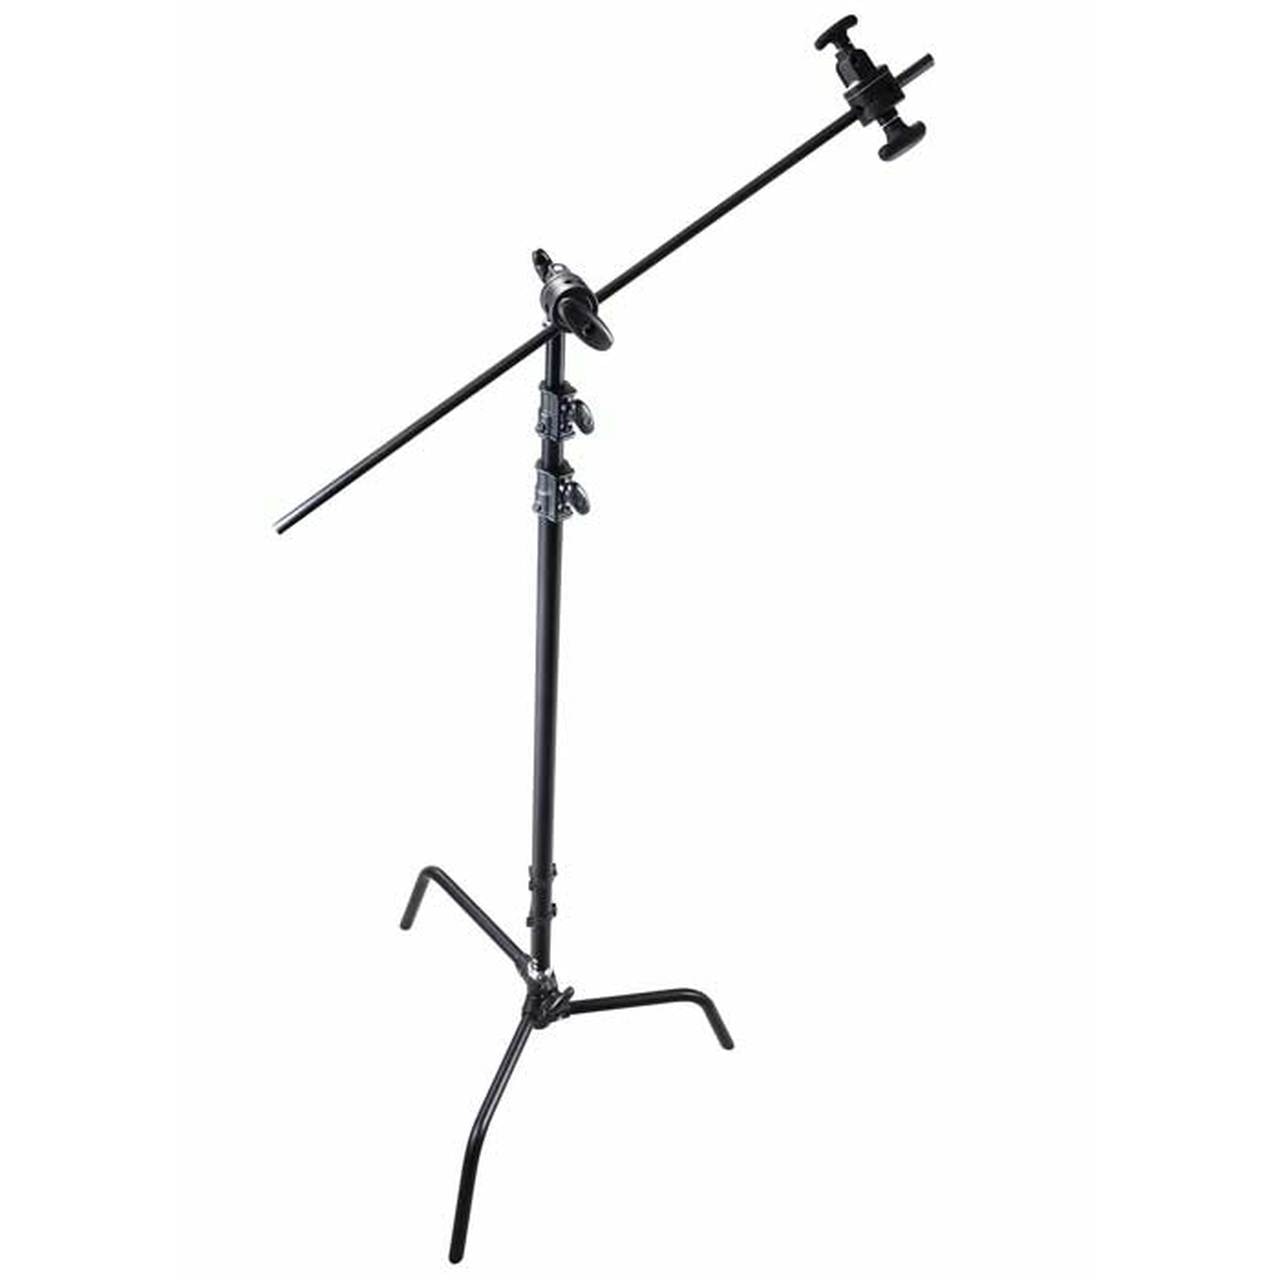 Promaster 5584 Professional C-Stand Kit  with Turtle Base - Black